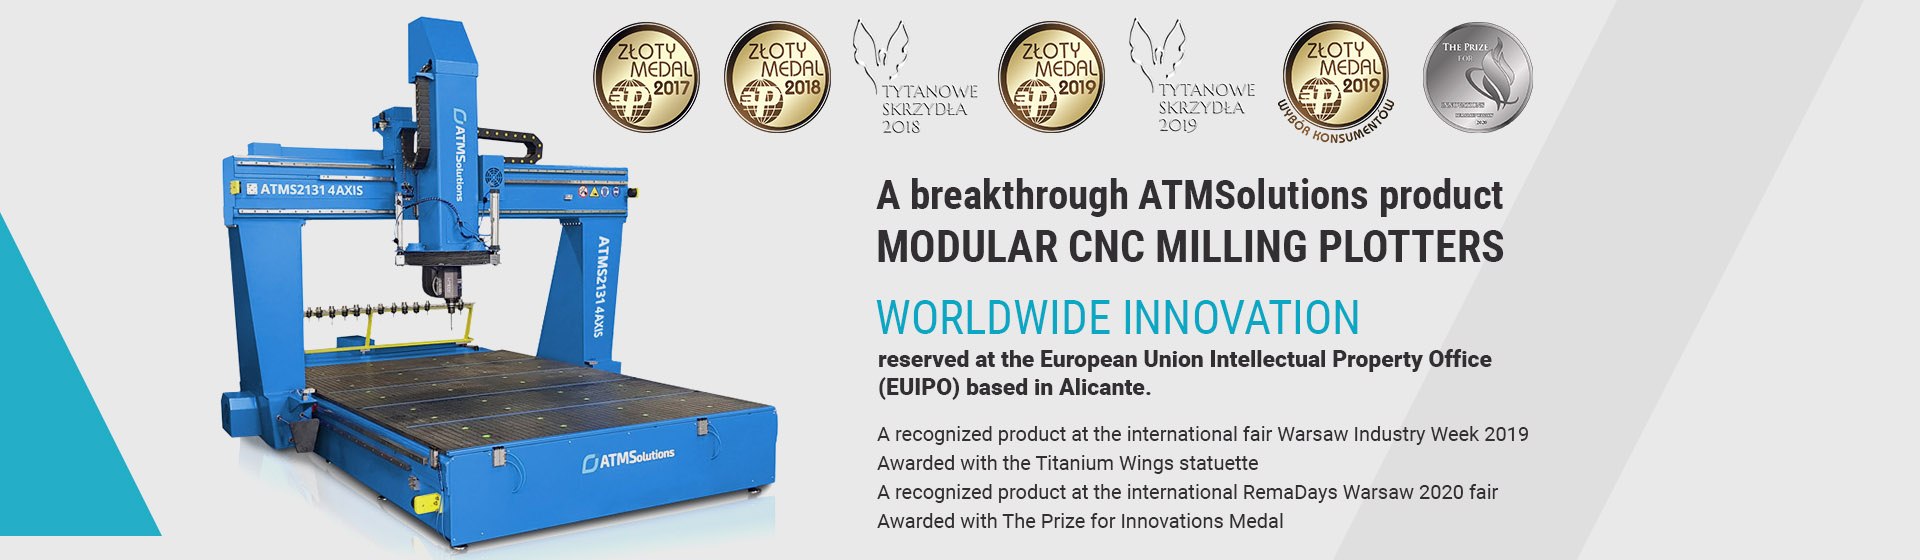 A breakthrough ATMSolutions product Modular CNC milling plotters